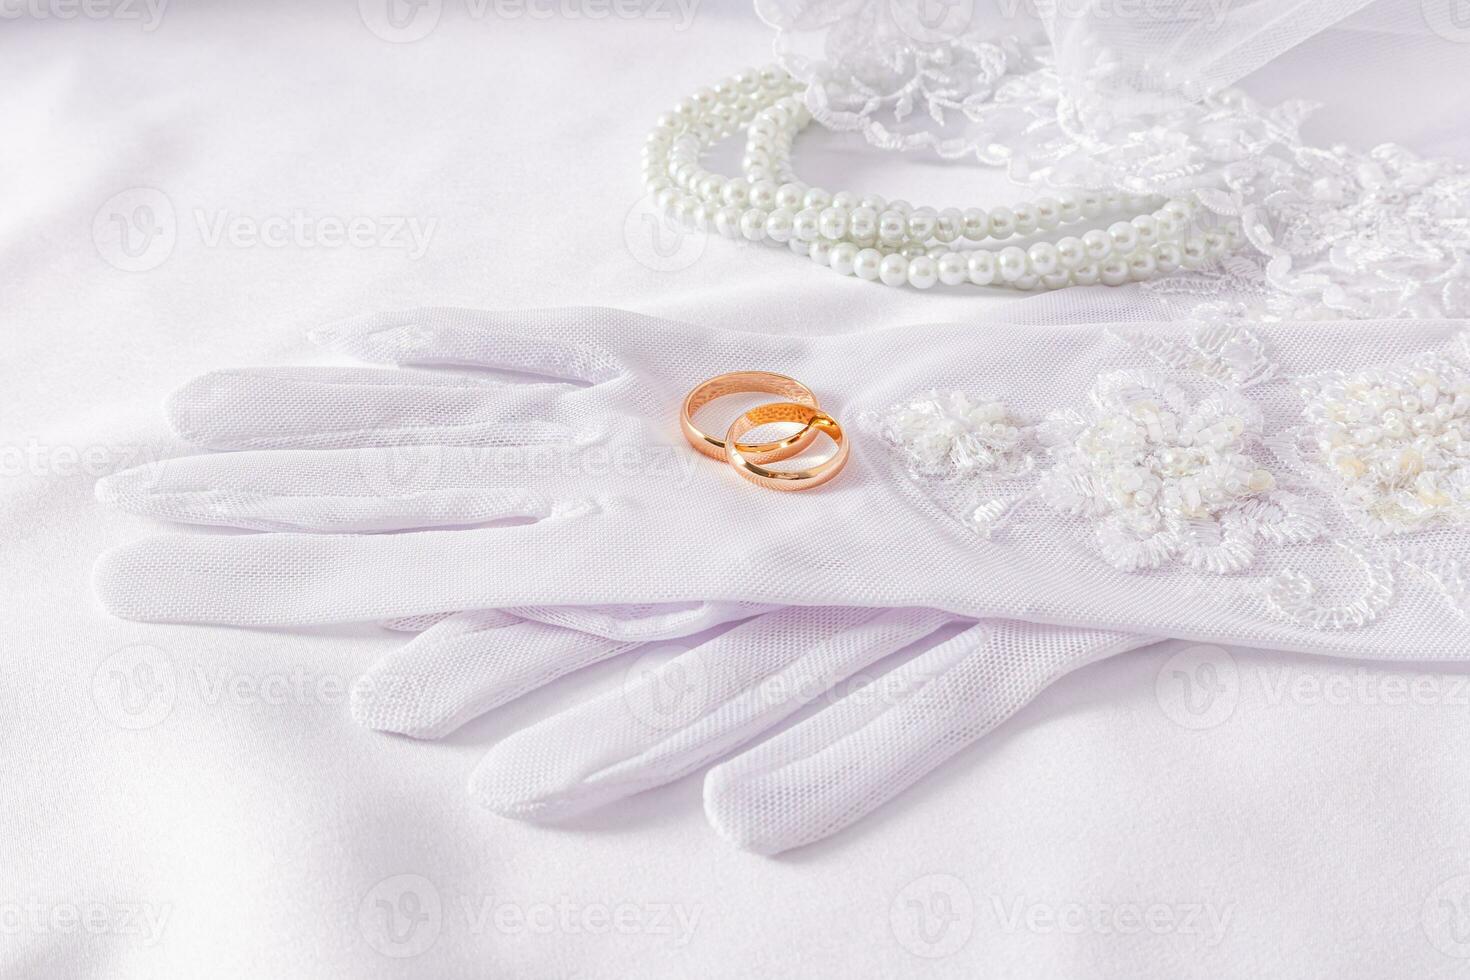 A pair of gold wedding rings lie on luxurious wedding white gloves. White satin background with pearl beads. Wedding accessories concept. photo